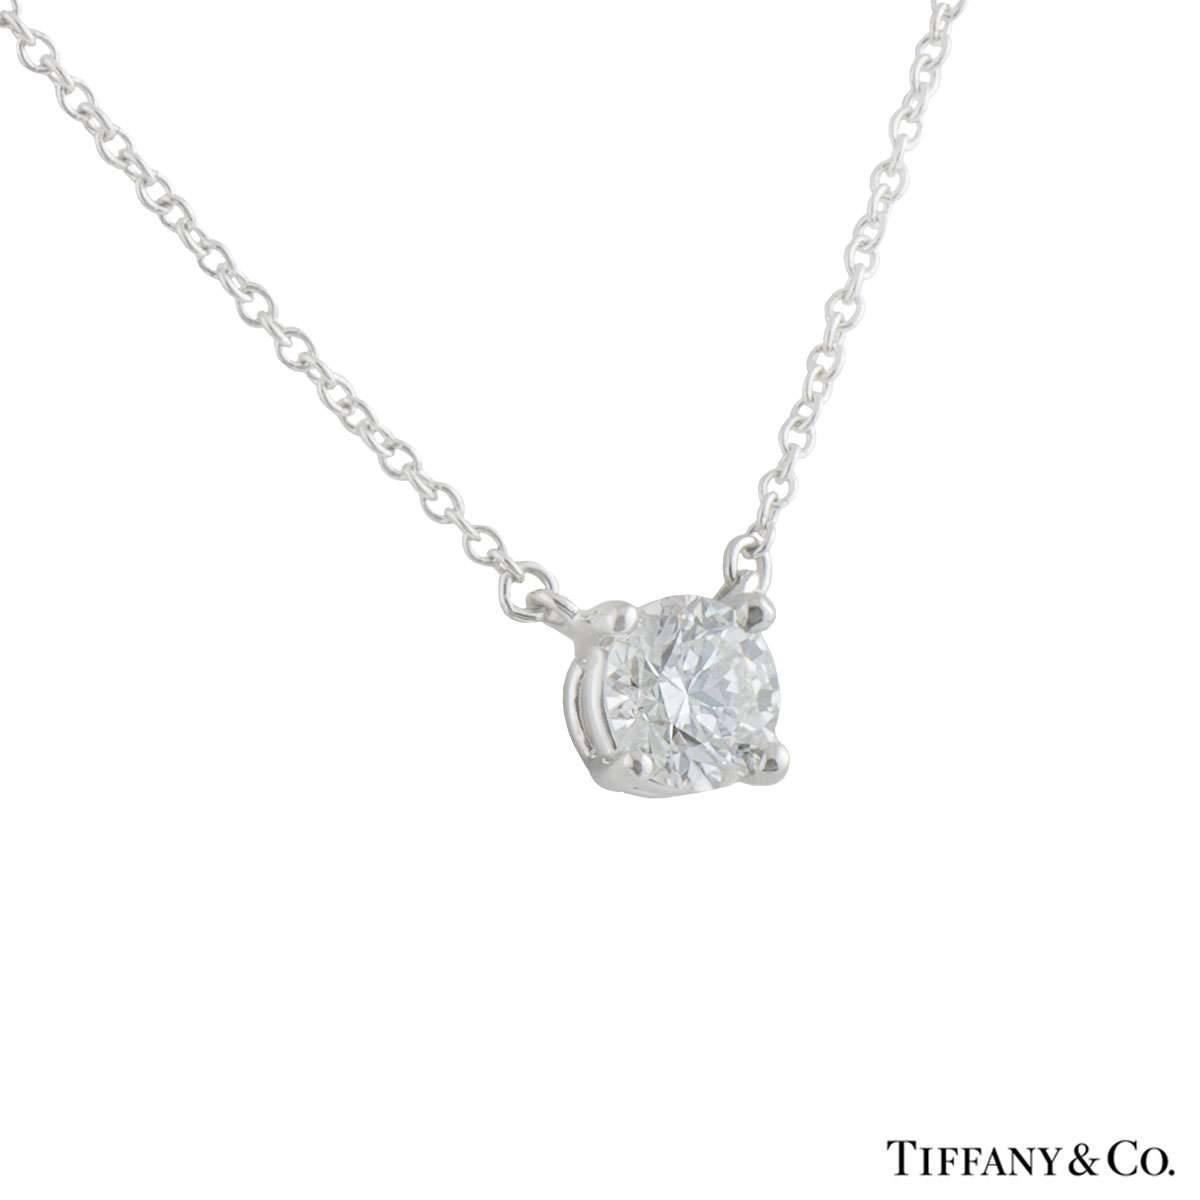 A beautiful platinum diamond Tiffany & Co. pendant. The pendant comprises of a solitaire diamond in a 4 claw with a weight of 0.61ct, J colour and VS1 clarity. The diamond scores an excellent rating in all three aspects for cut, polish and symmetry